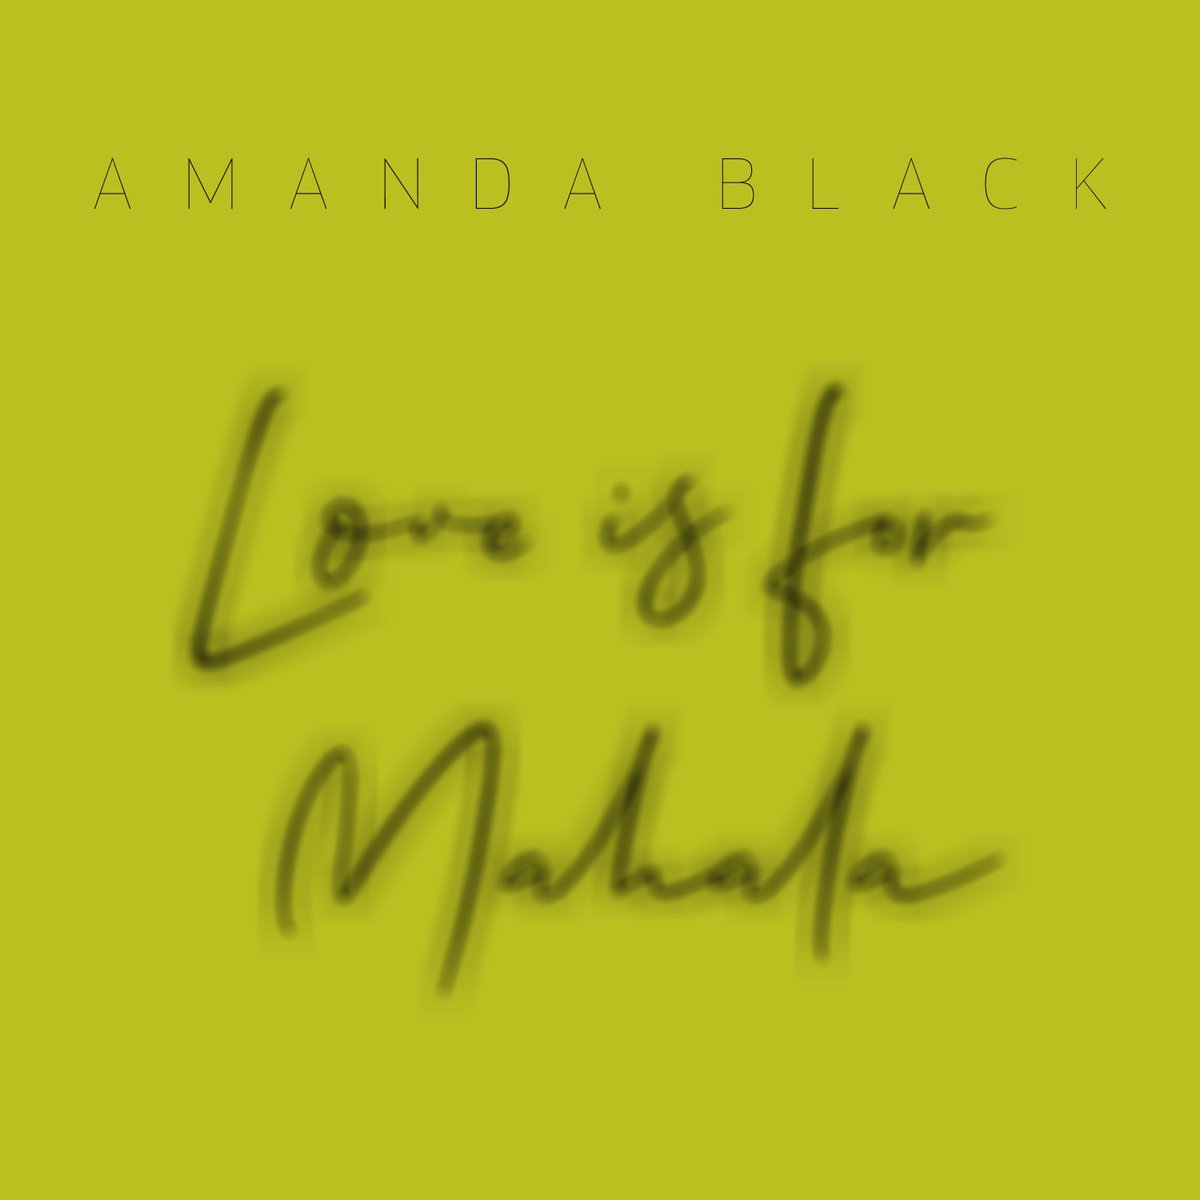 Pre-add Amanda Black's new album #FromMySoilToYours and get #LoveIsForMahala SonyMusicAfrica.lnk.to/LoveIsForMahala